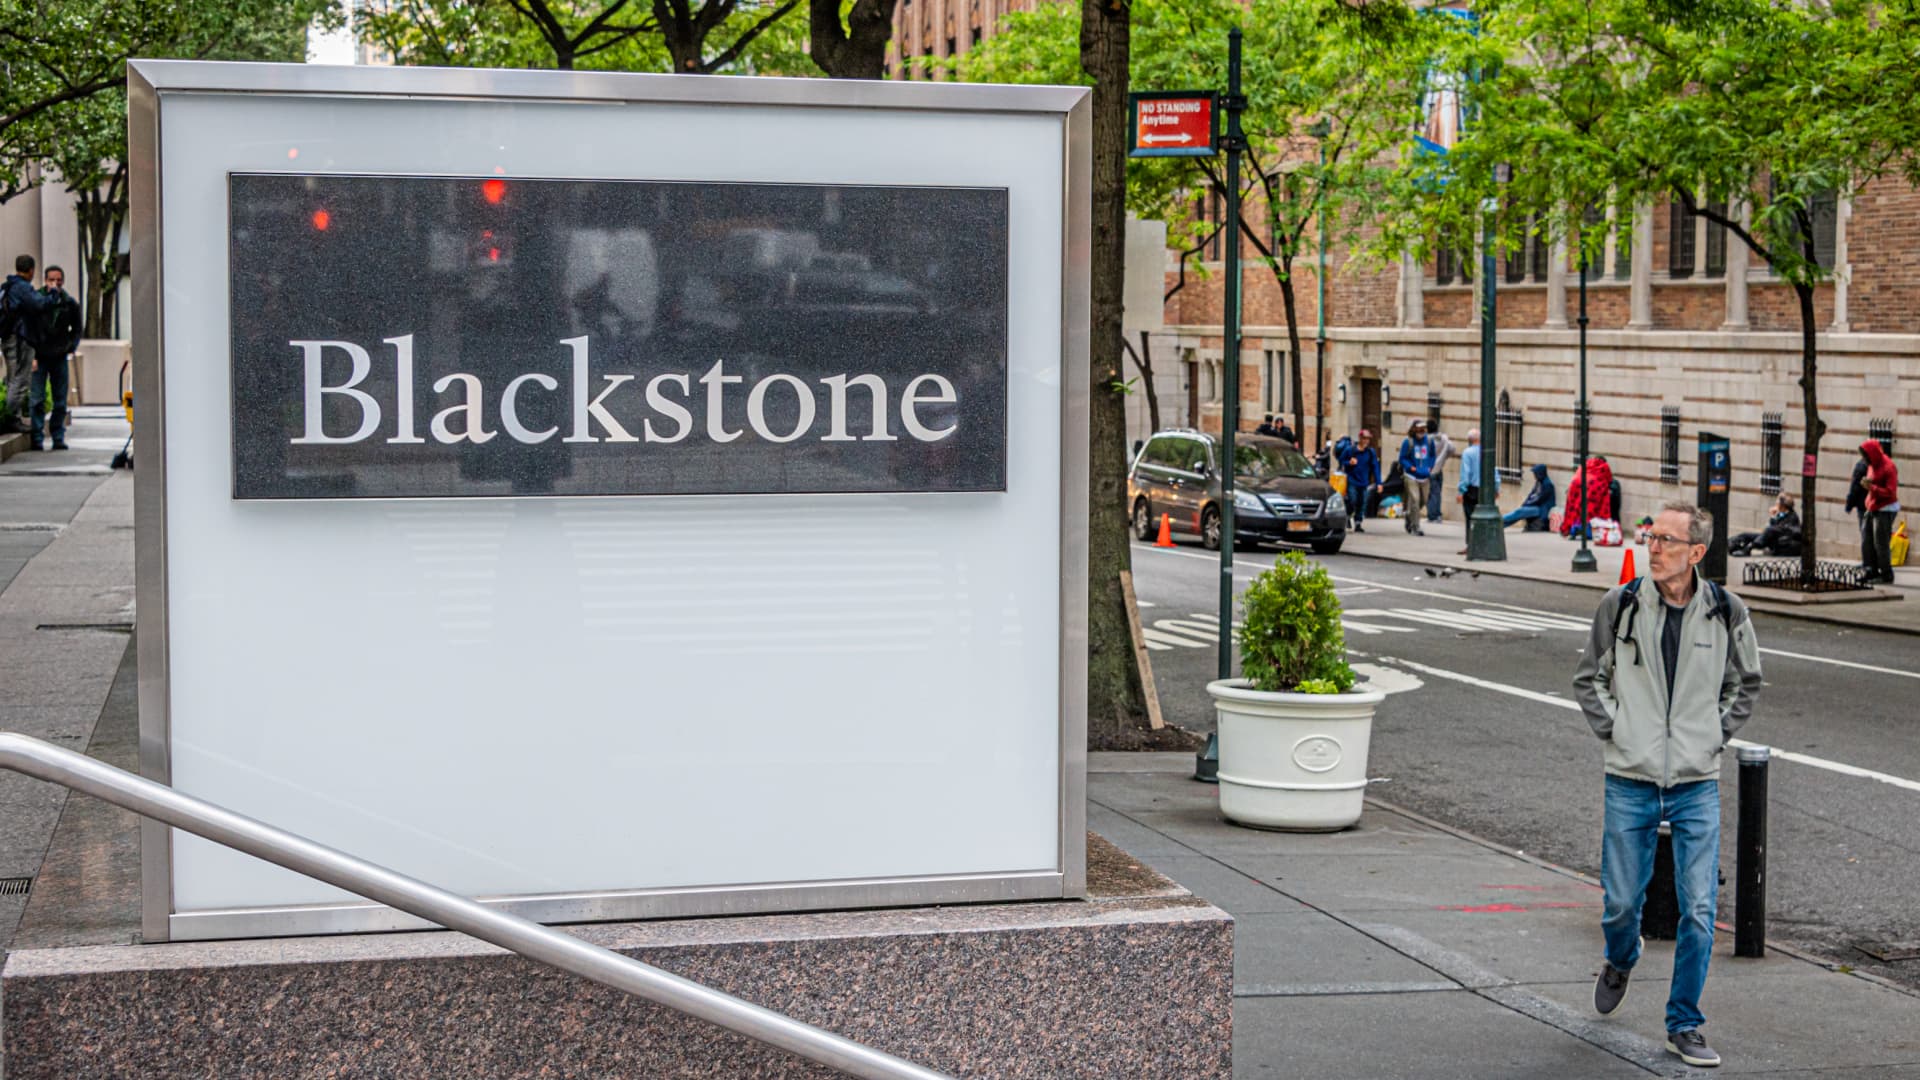 Barclays downgrades Blackstone shares following organization limitations withdrawals from real estate fund